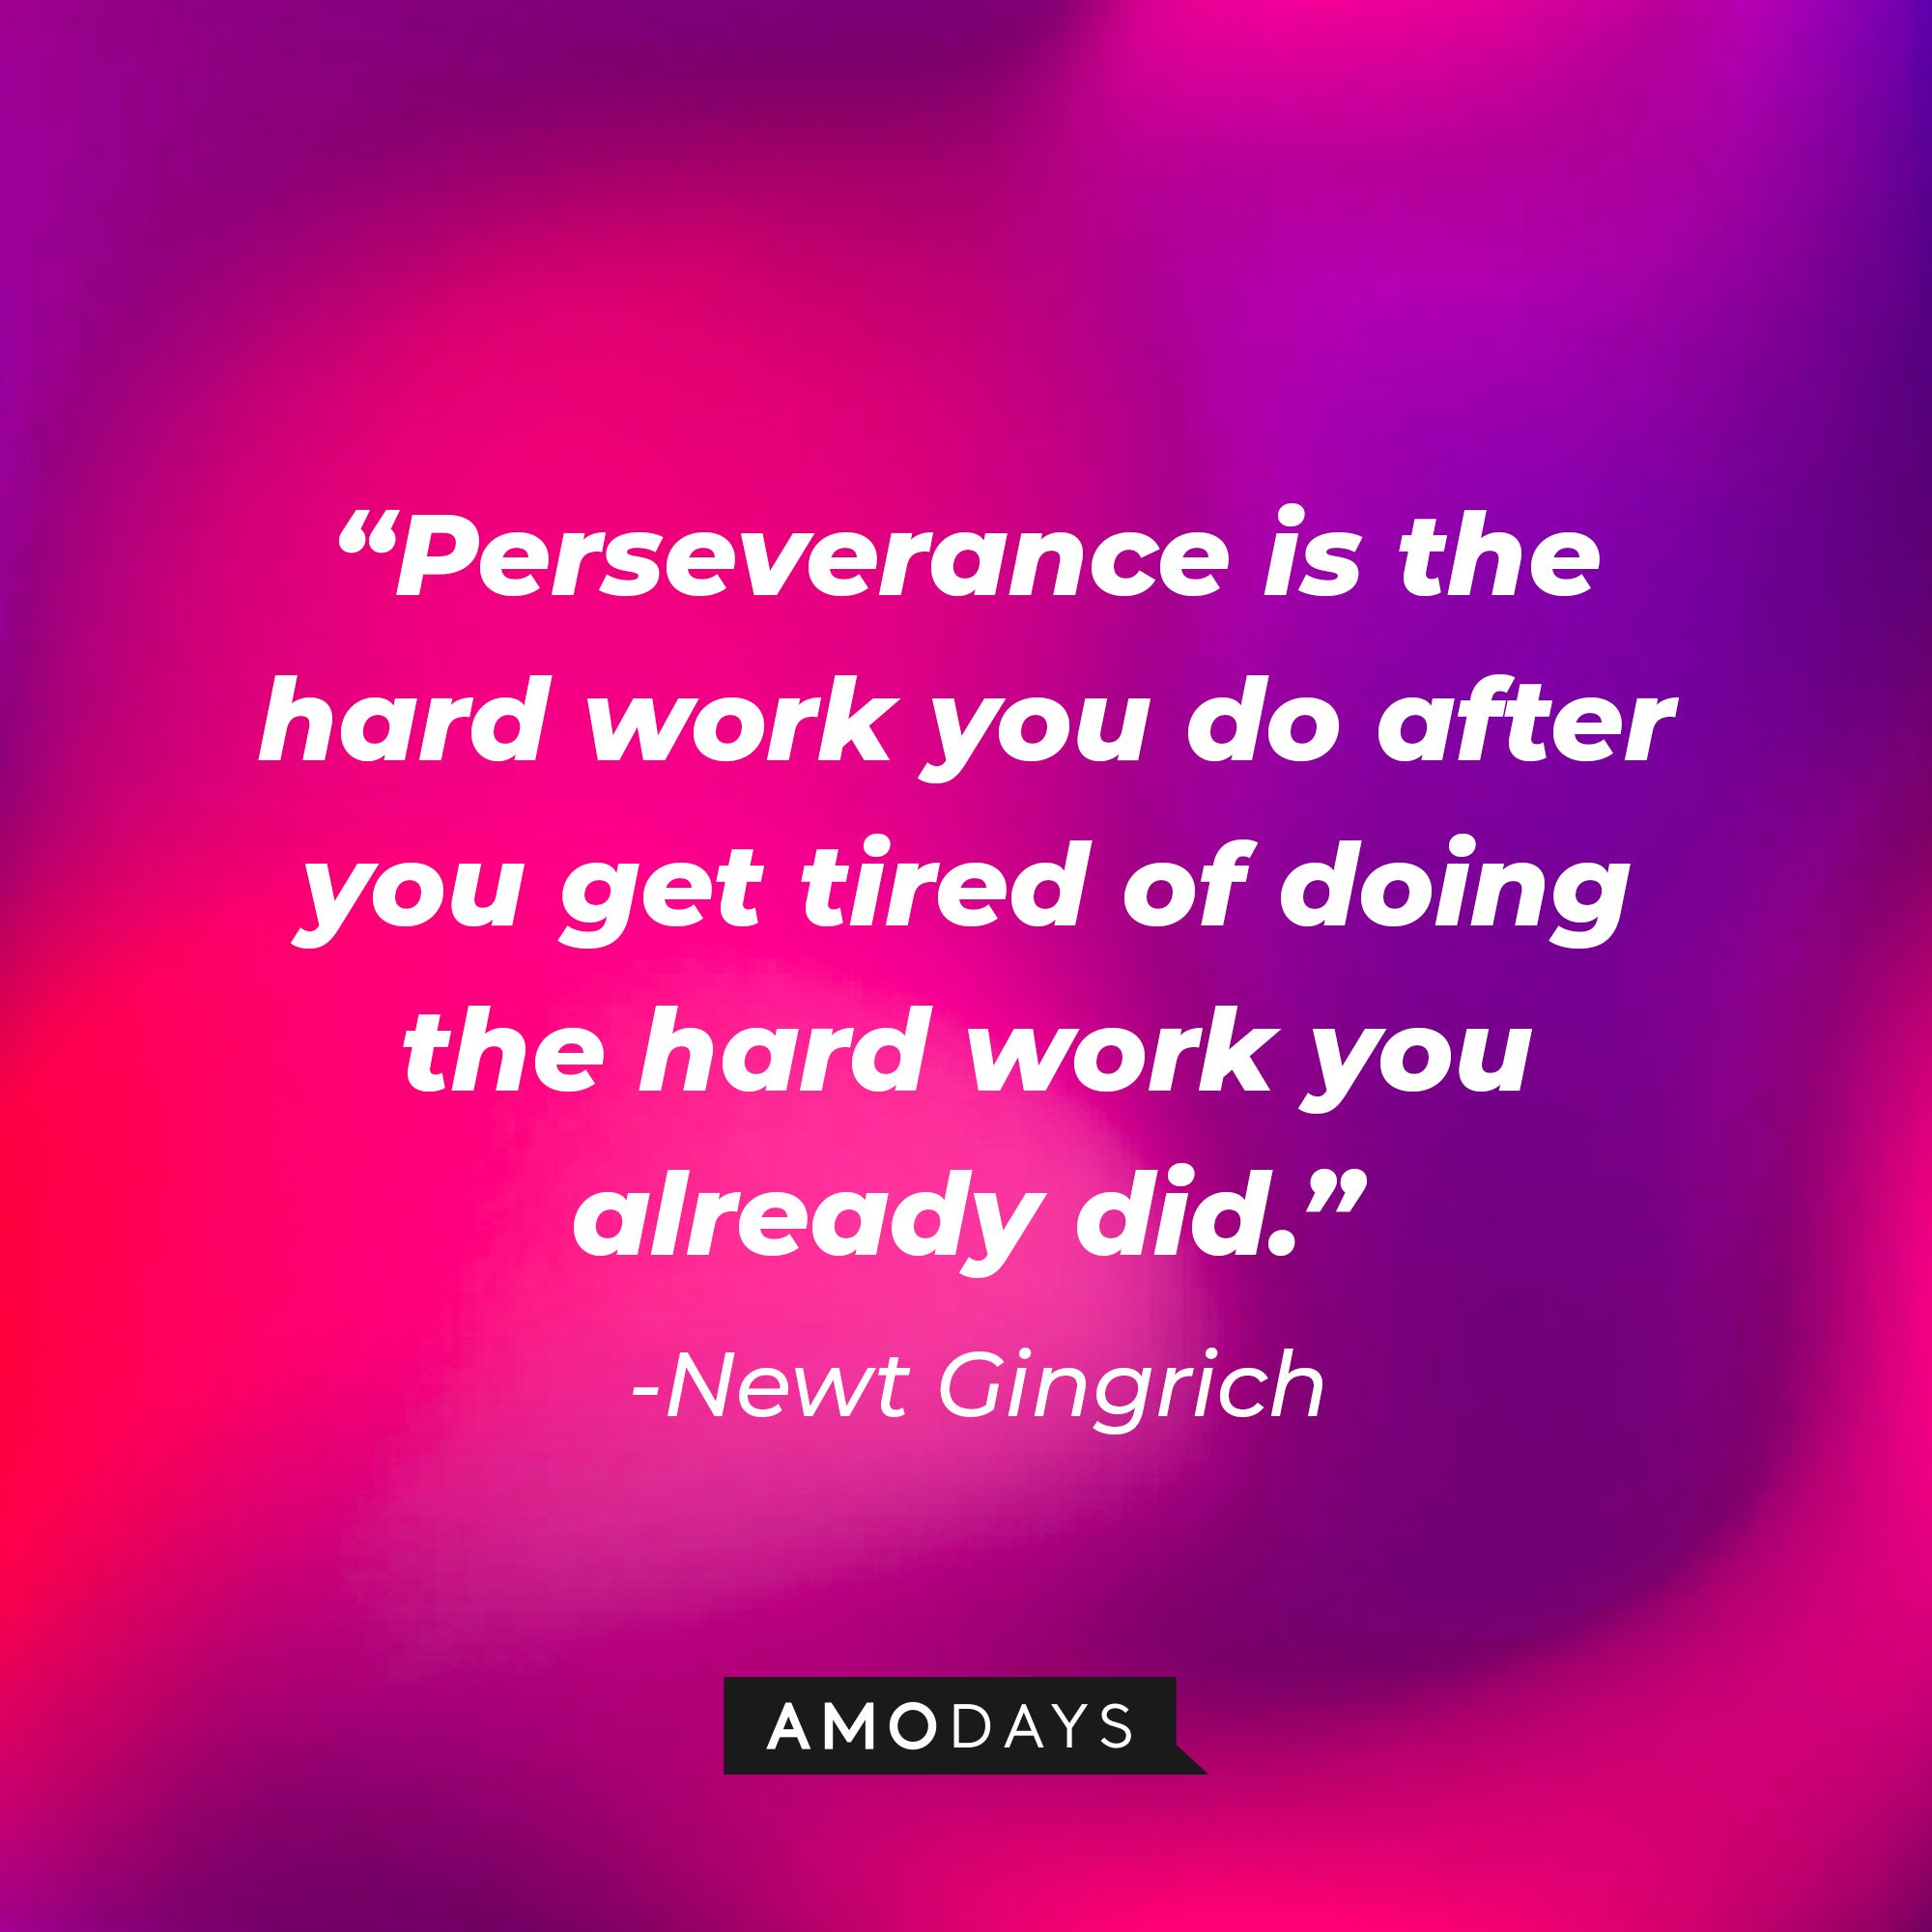  Newt Gingrich's quote: “Perseverance is the hard work you do after you get tired of doing the hard work you already did.” | Image: AmoDays